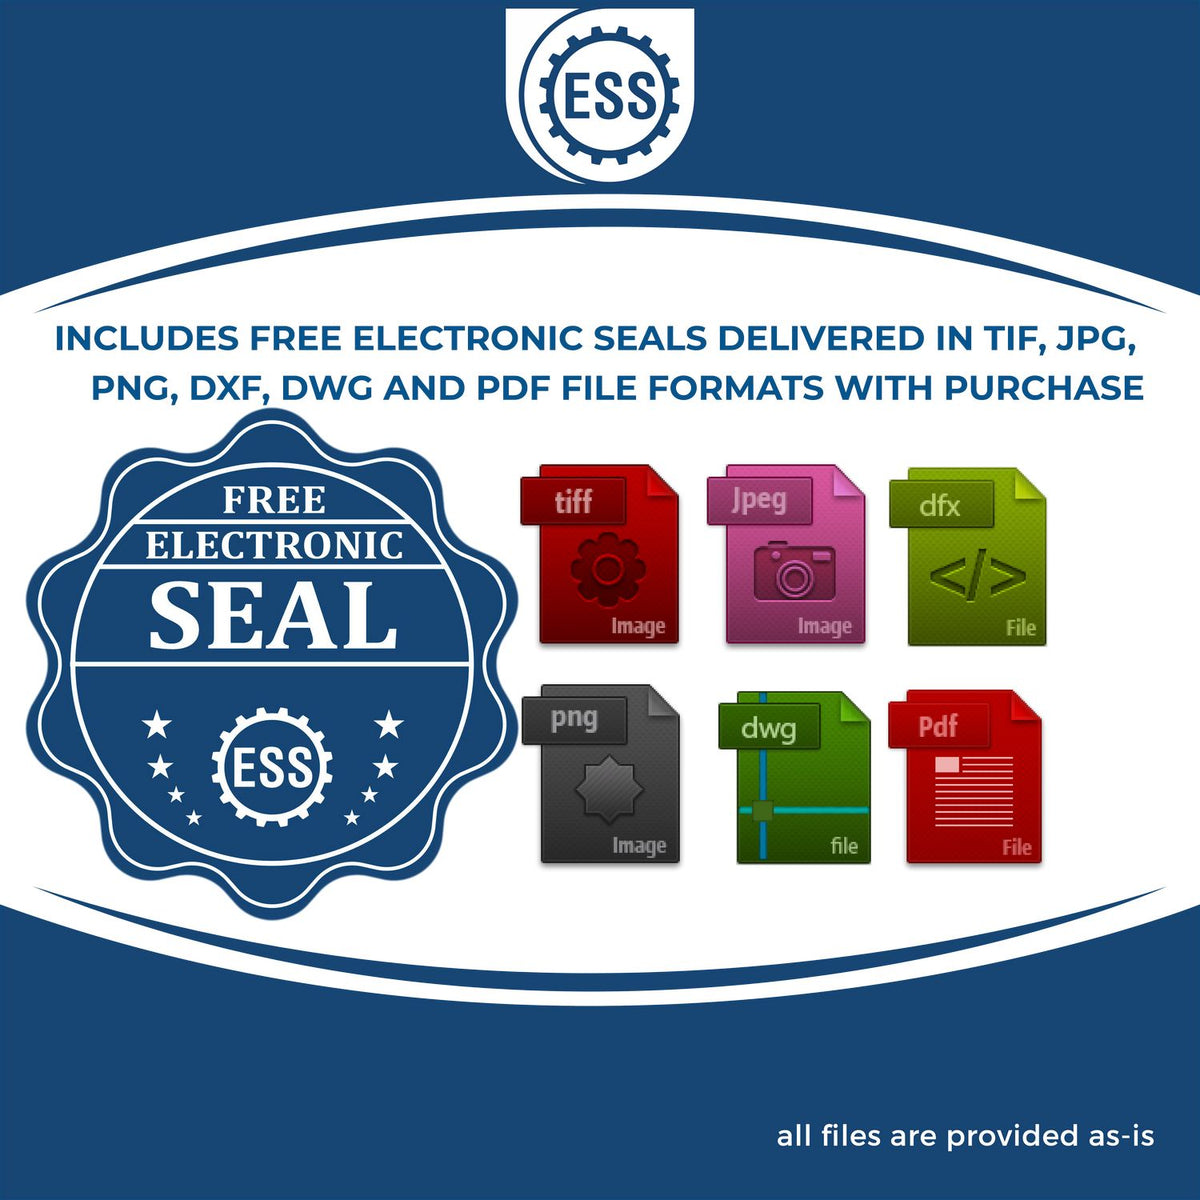 An infographic for the free electronic seal for the Slim Pre-Inked Tennessee Professional Geologist Seal Stamp illustrating the different file type icons such as DXF, DWG, TIF, JPG and PNG.